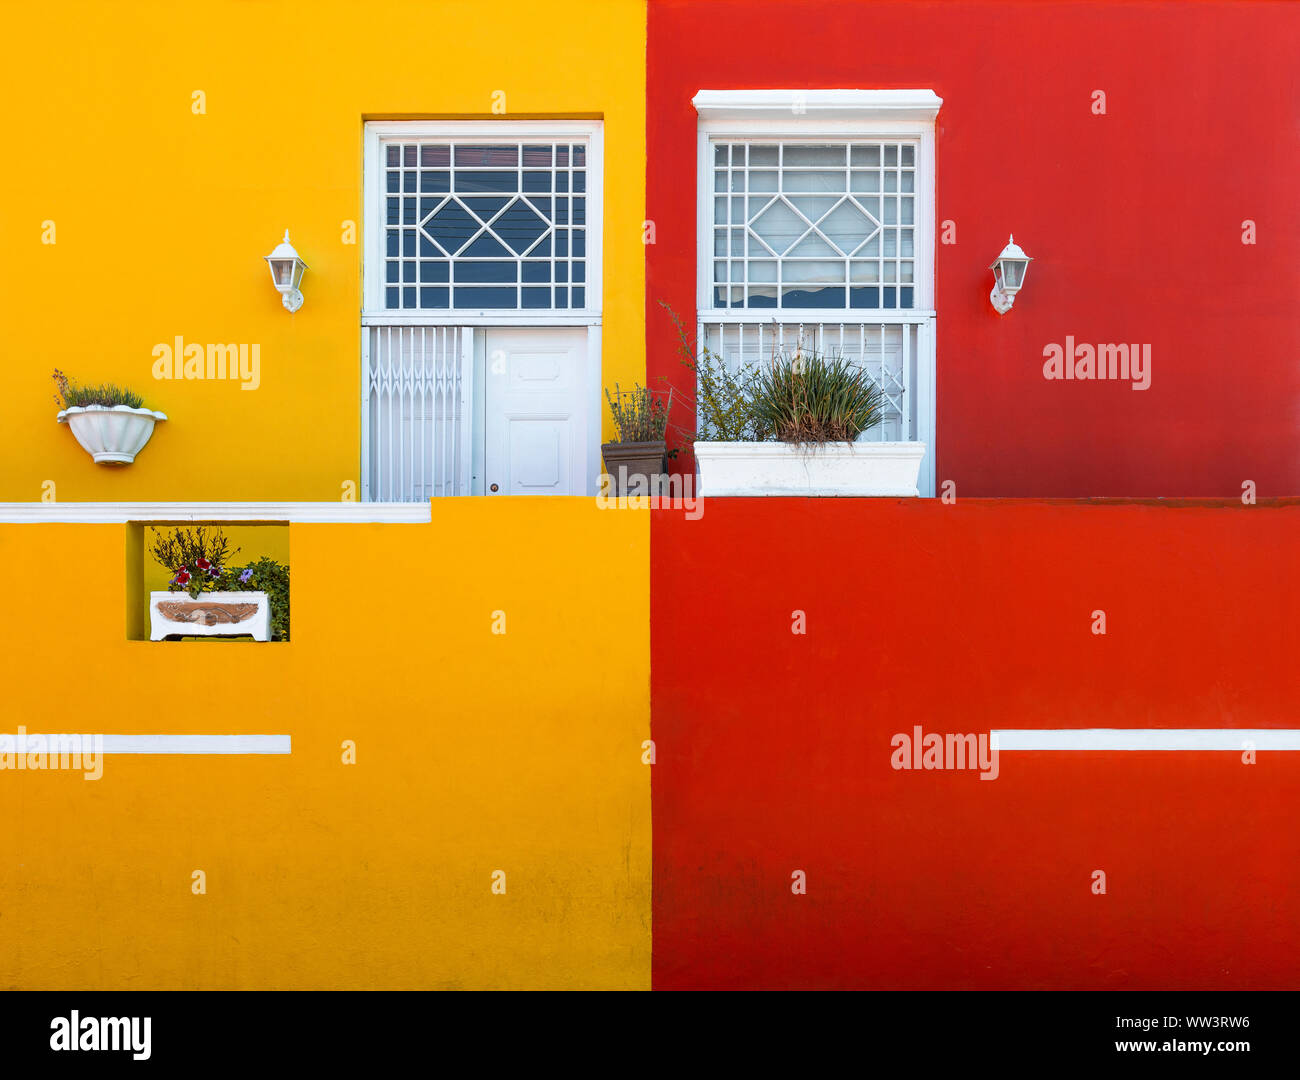 Yellow and Red facade with doors and windows in the colorful malay district of Bo Kaap in Cape Town, Western Cape province, South Africa. Stock Photo